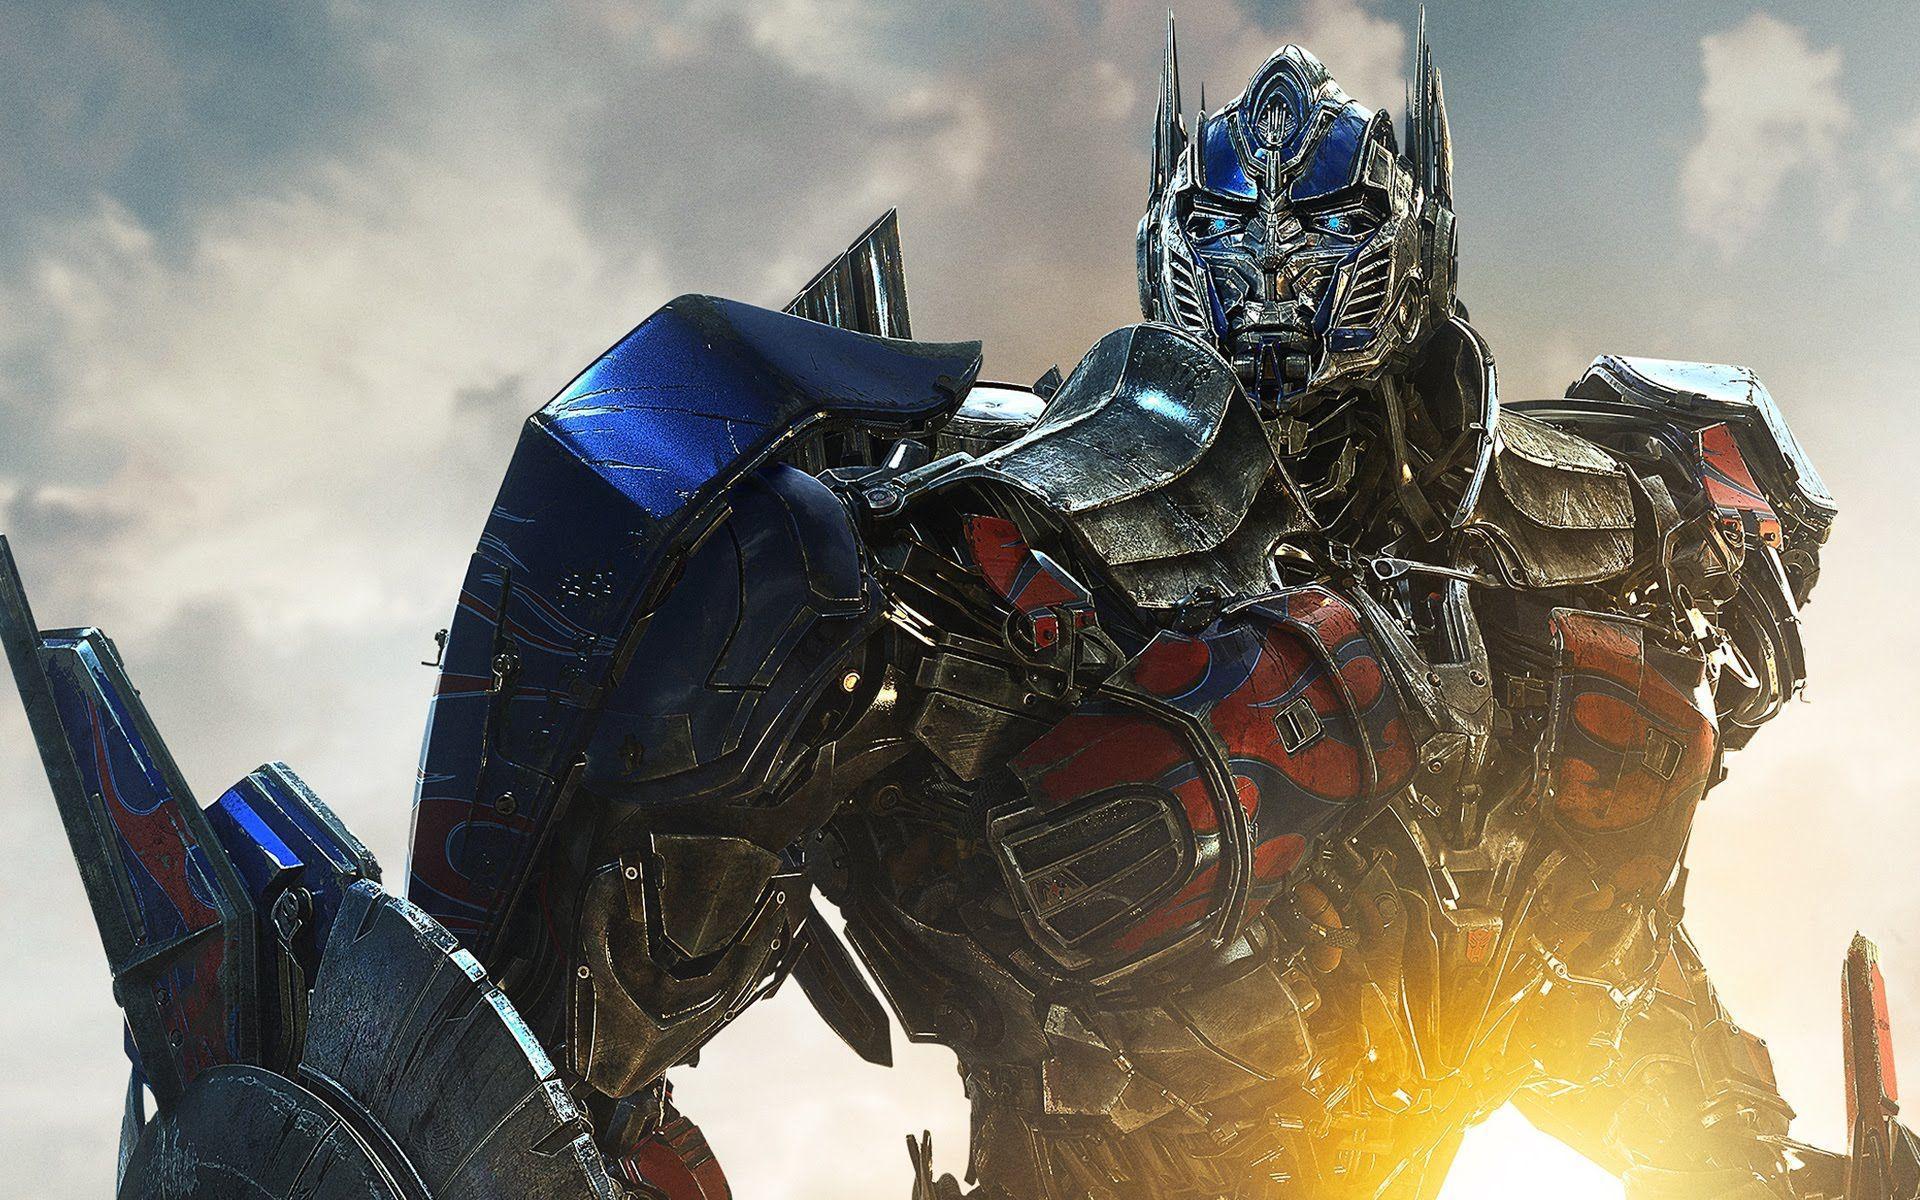 Transformers 5 Wallpaper High Resolution and Quality Download